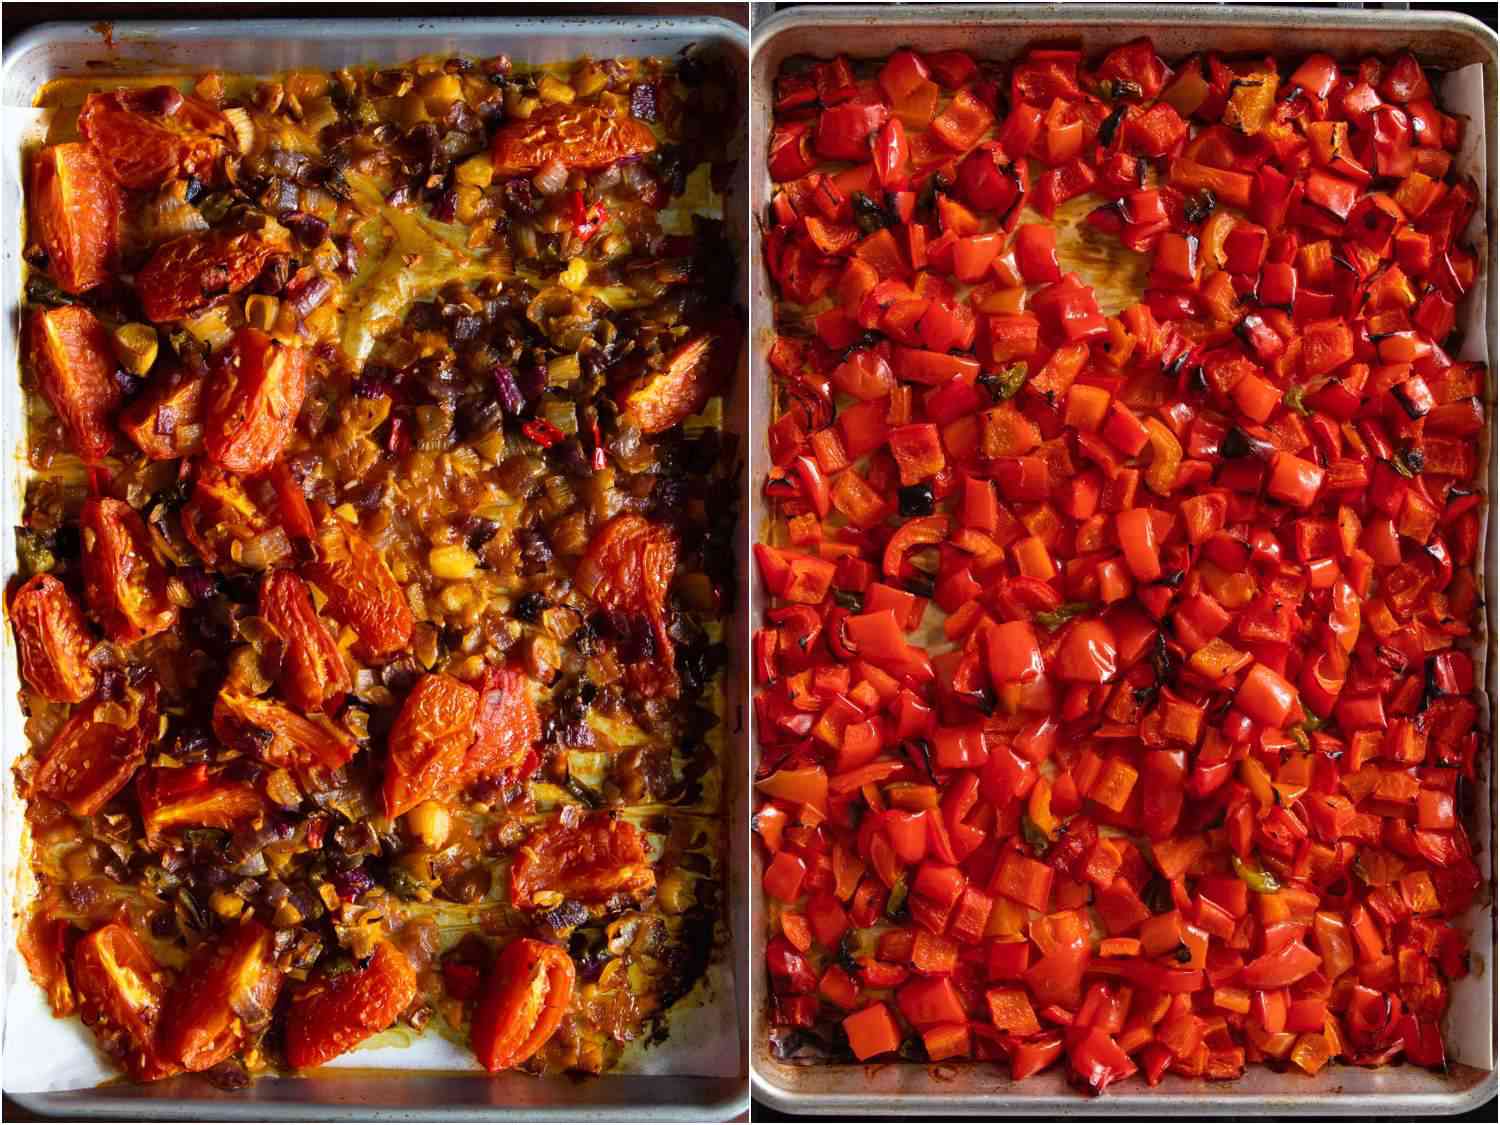 A baking tray full of roasted peppers, garlic, and tomatoes for obe ata.